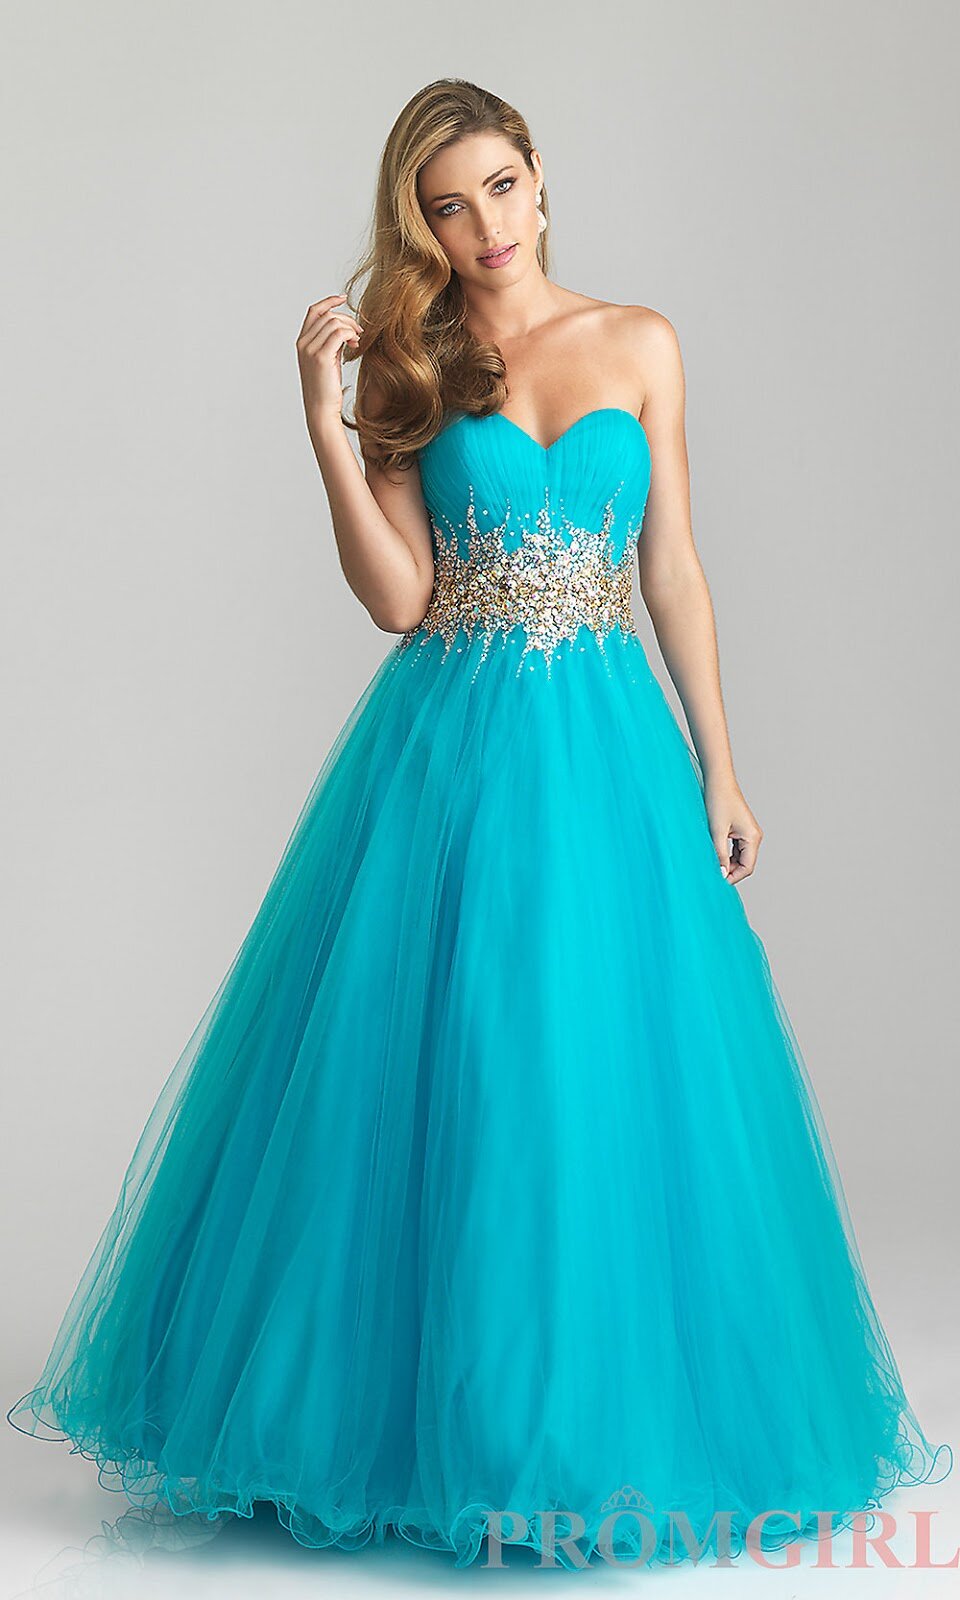 Turquoise dresses for weddings Photo - 6